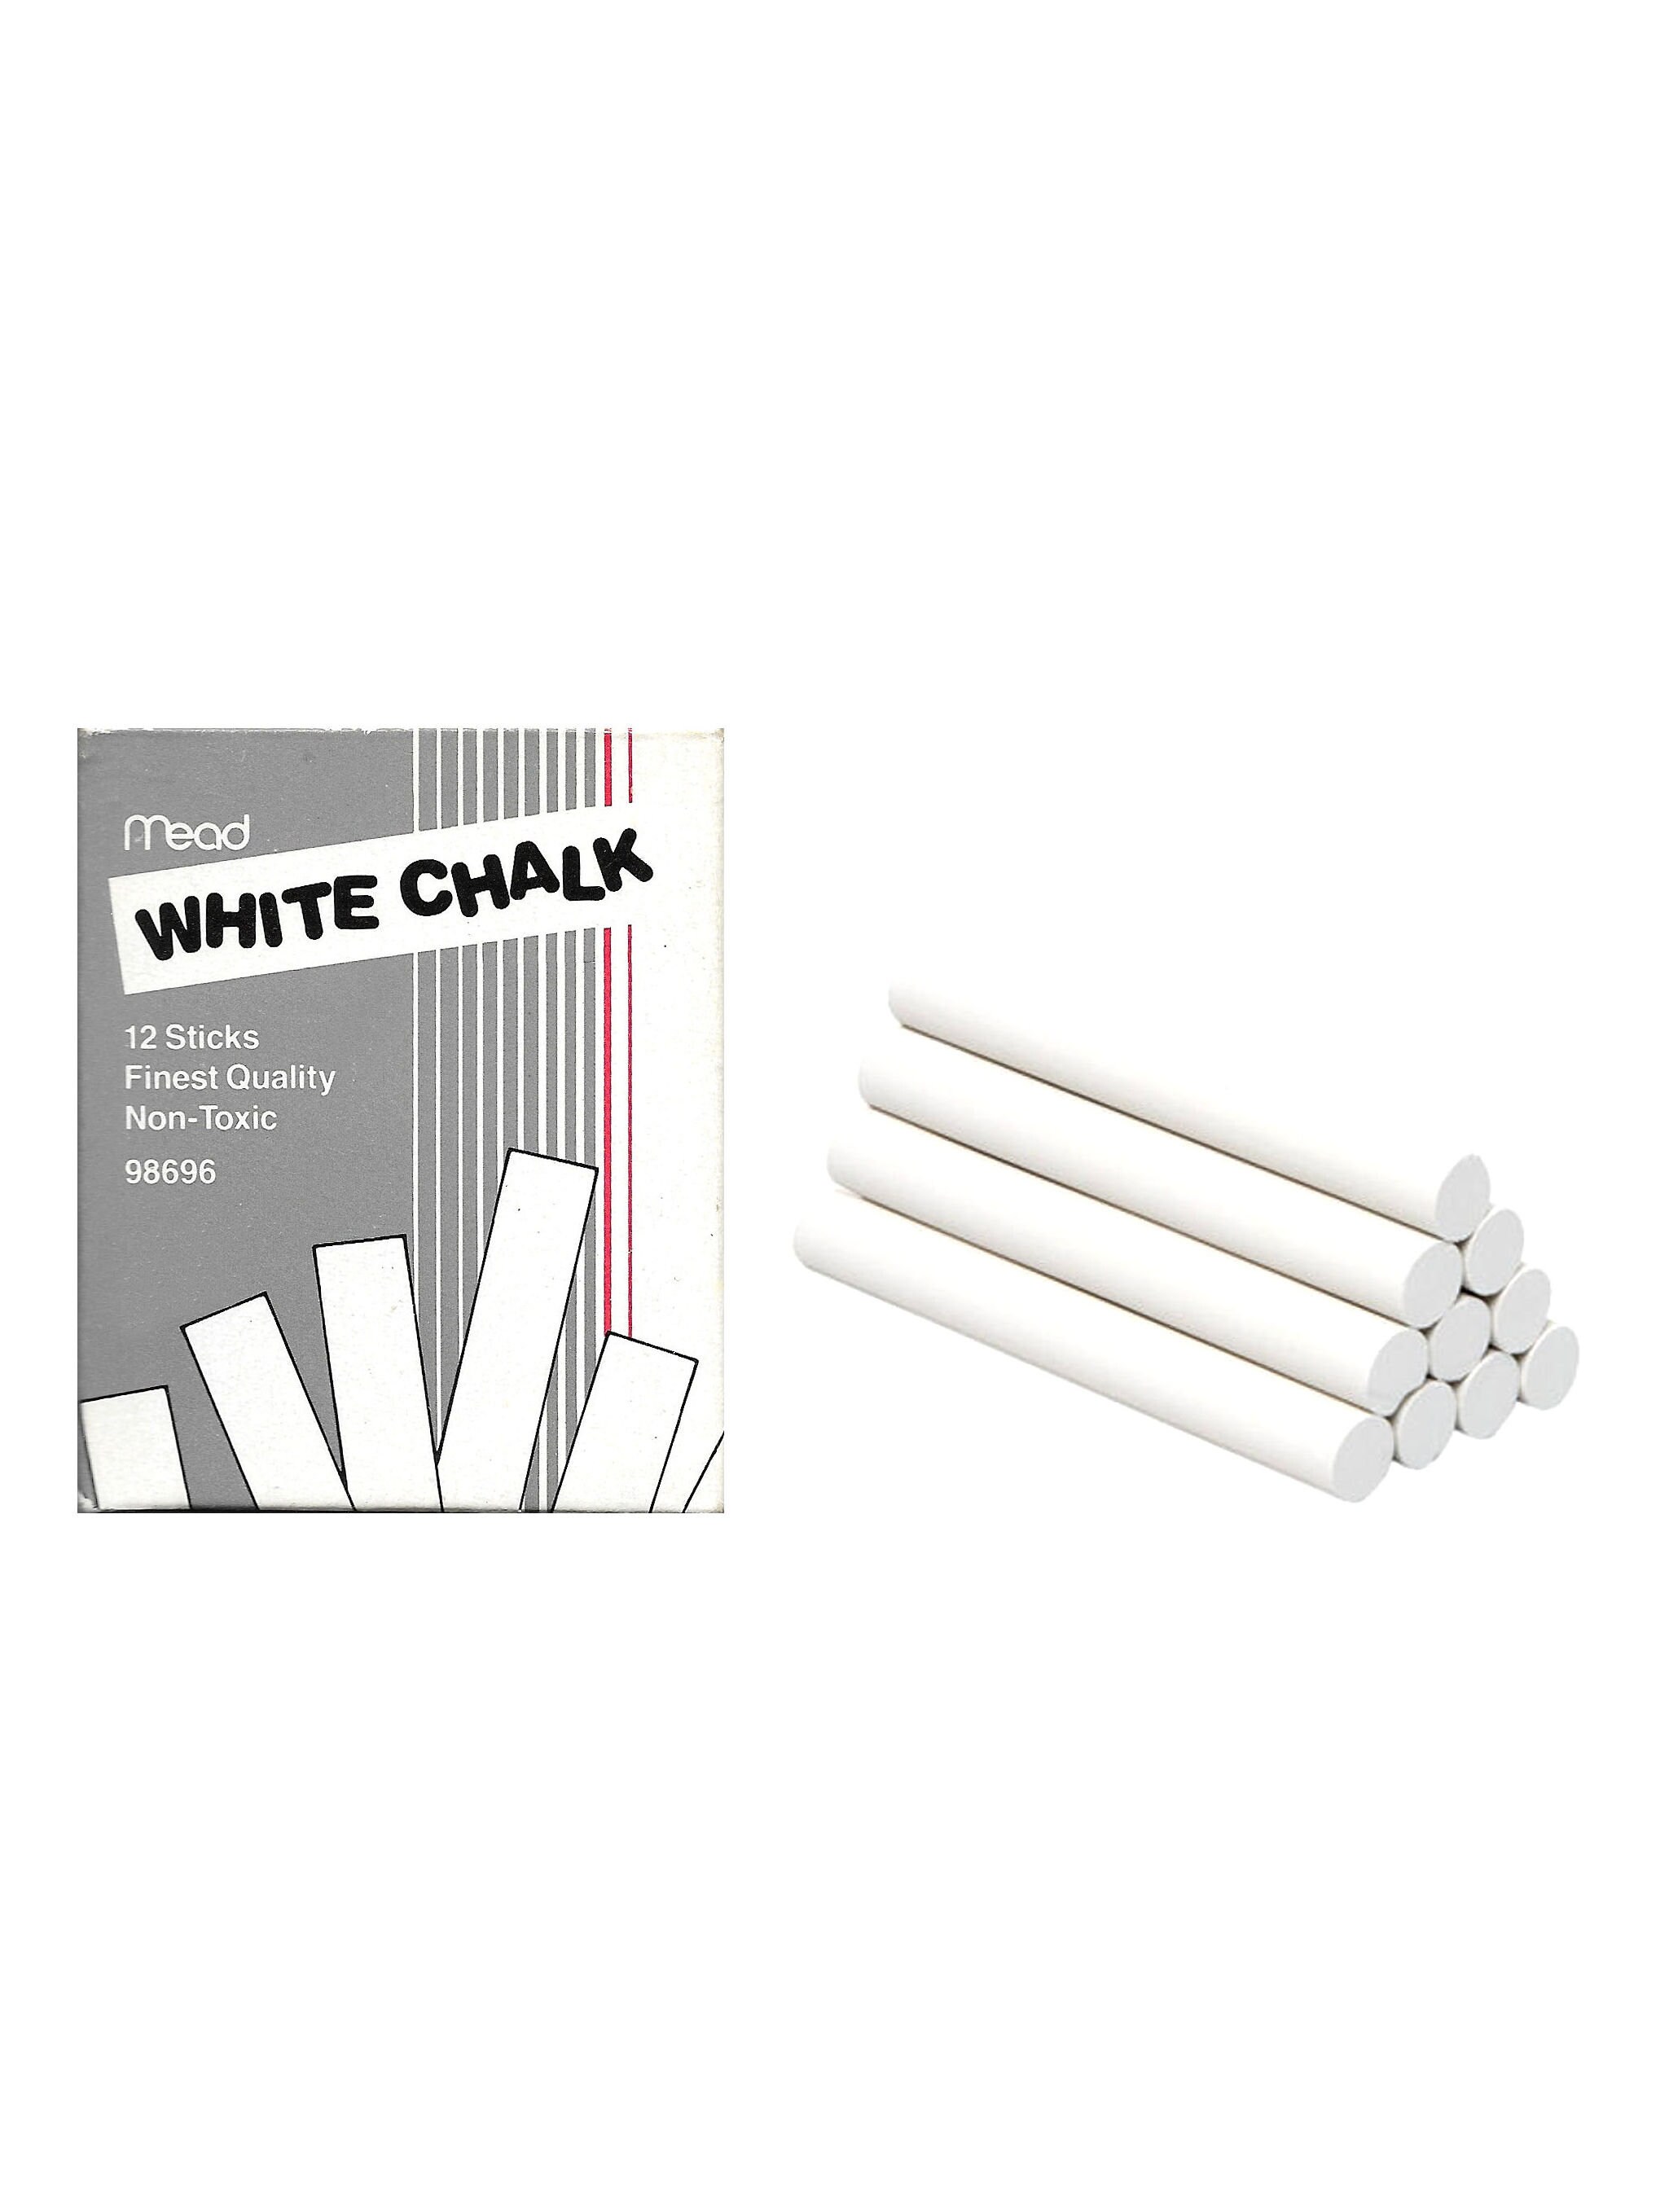 Quality wholesale sidewalk chalk For Smooth Writing And Marking